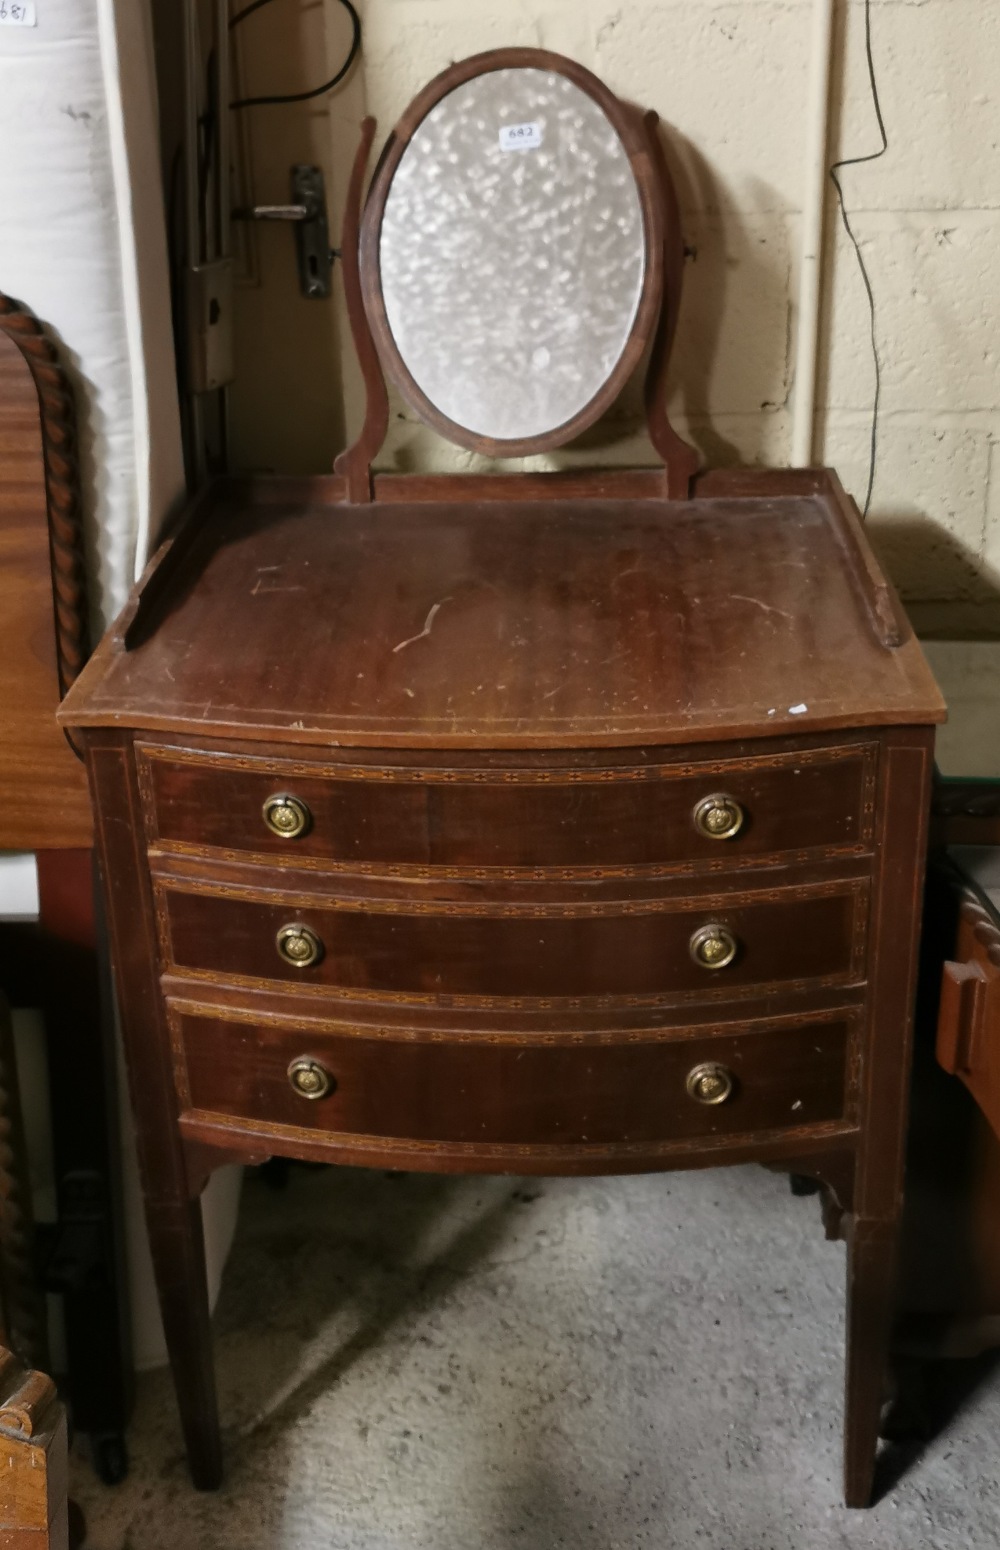 1950’s Mahogany Reproduction 3 Drawer and bow-fronted dressing Table, with an oval adjustable mirror